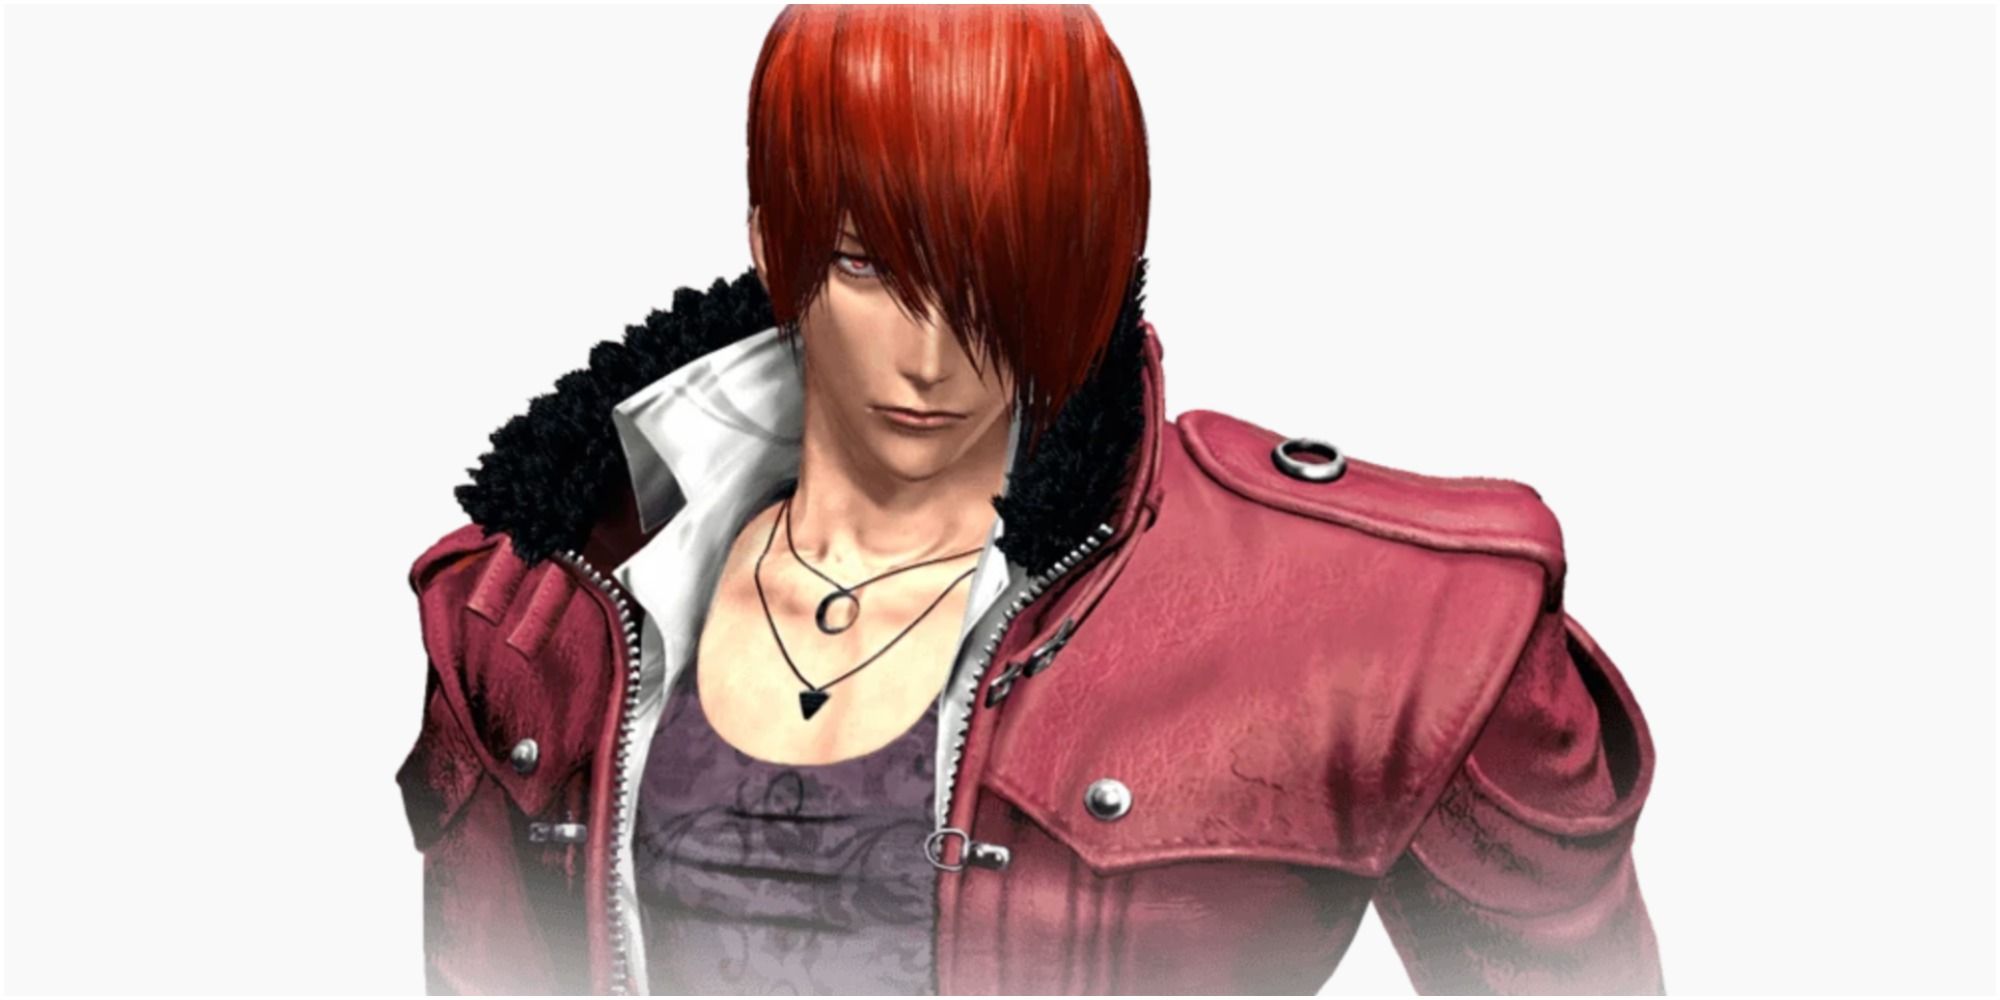 Iori Yagami from the King Of Fighters series